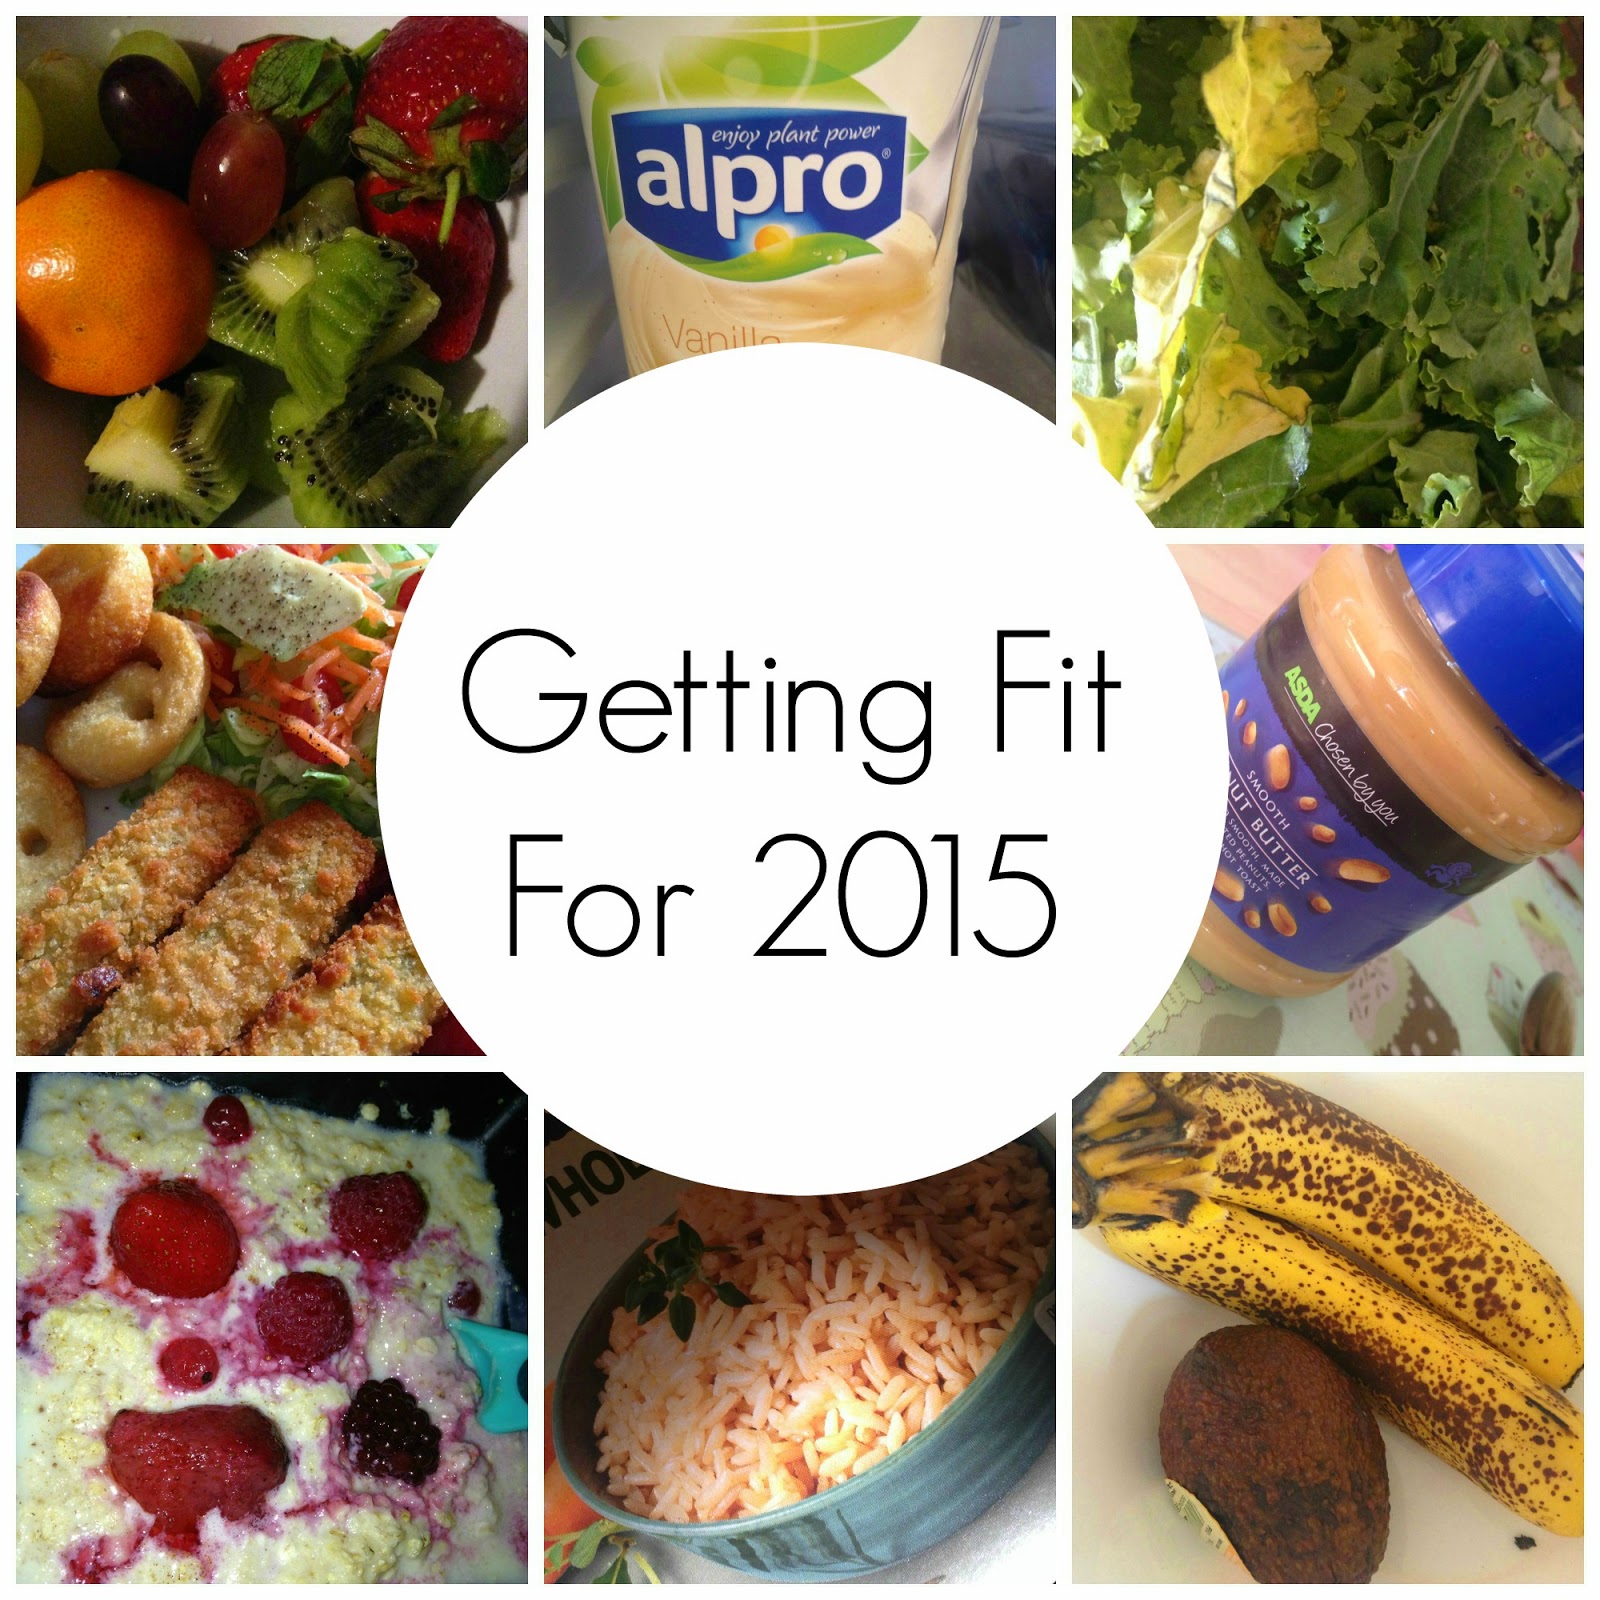 Getting fit for 2015